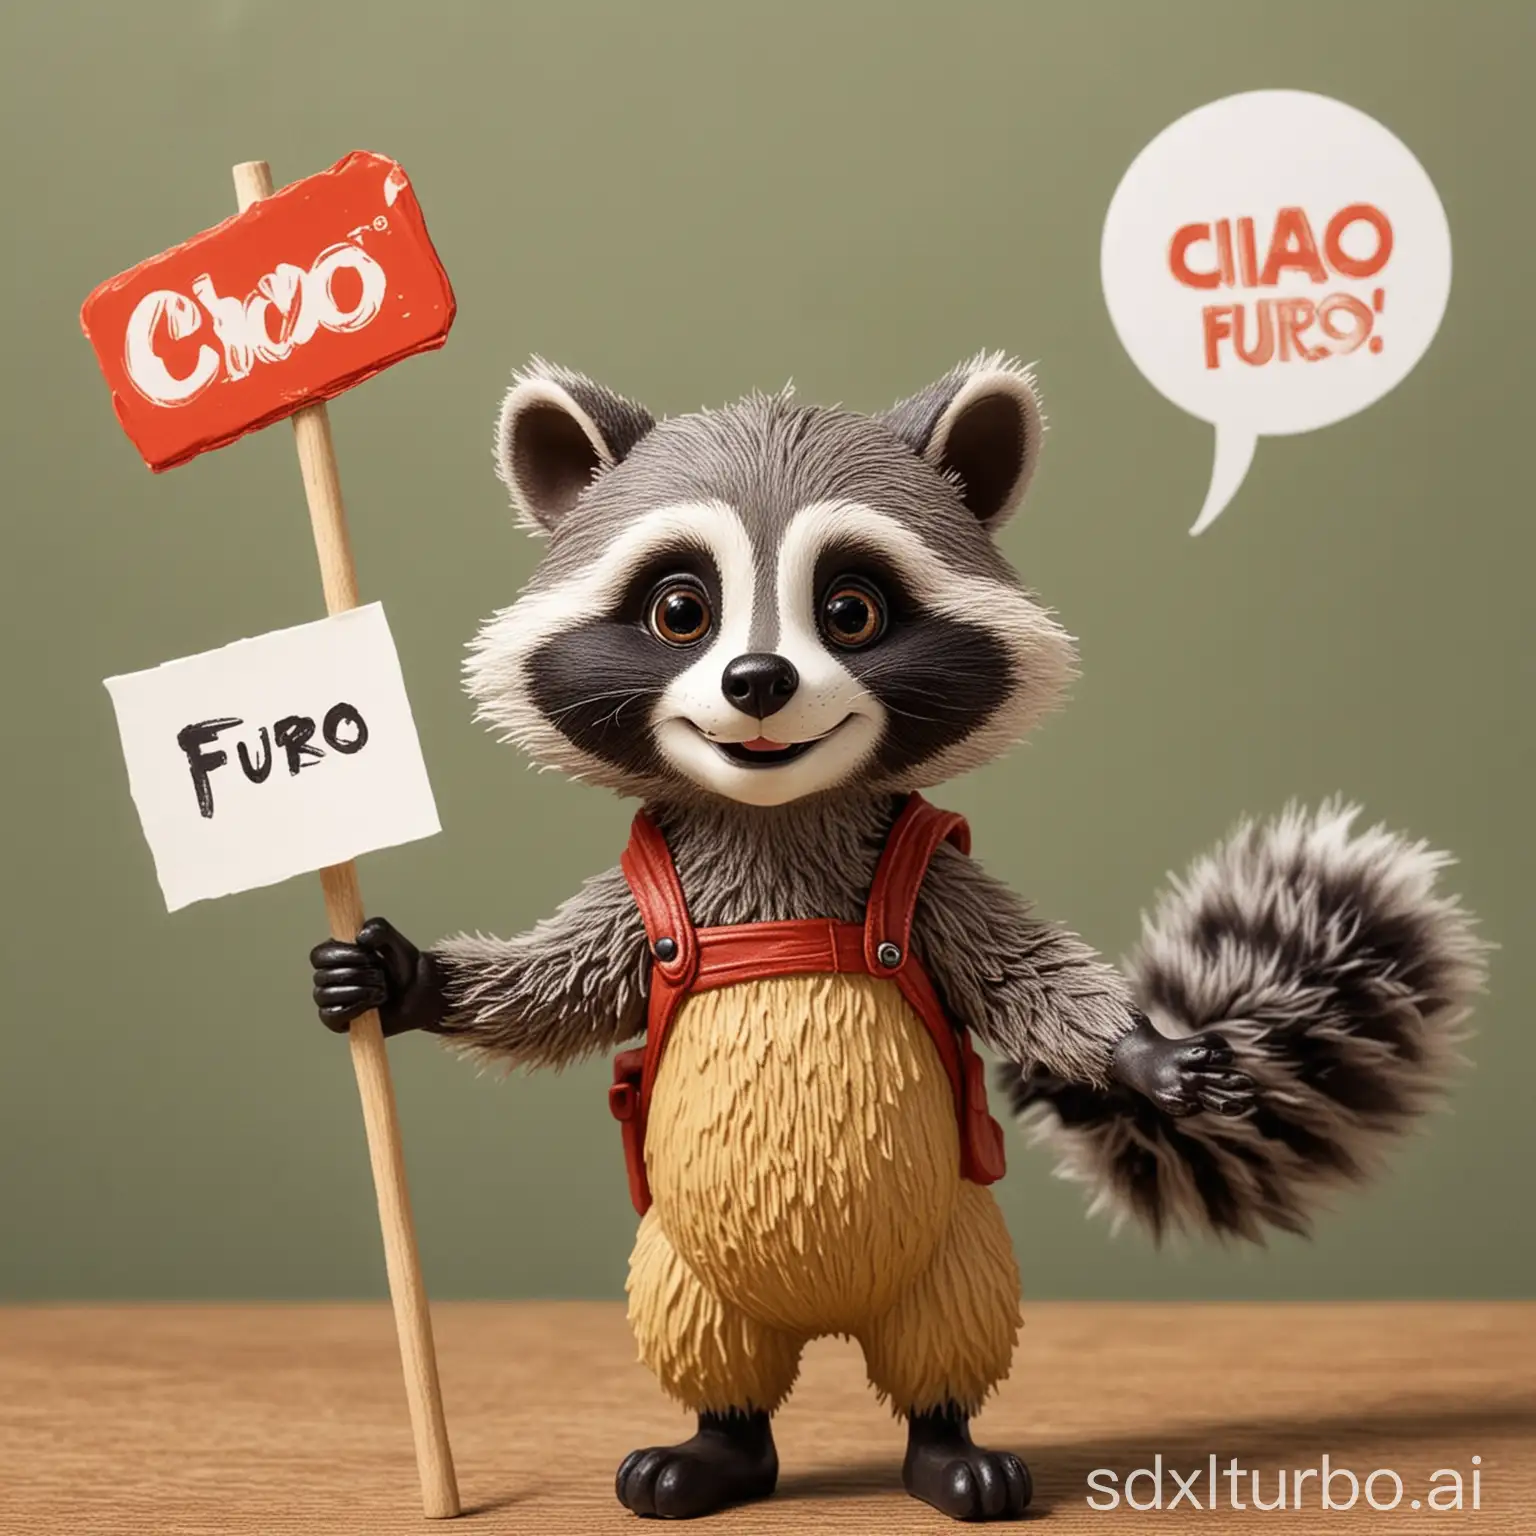 Cheerful-Raccoon-Holding-CIAO-FURO-Sign-in-Detailed-Belgian-Comic-Style